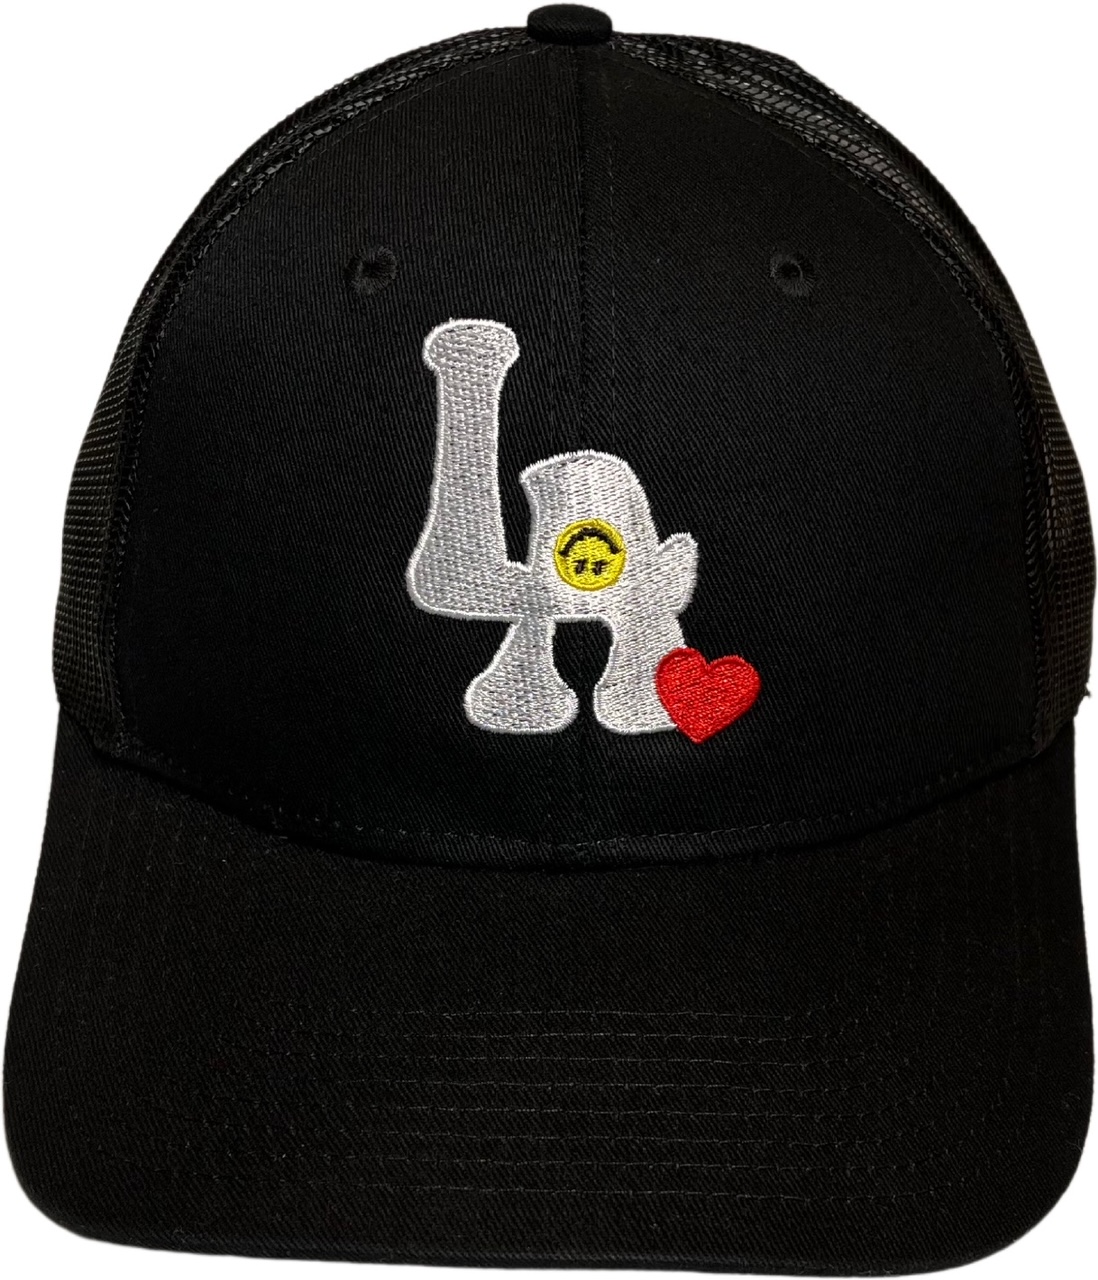 Black hat with Smiley